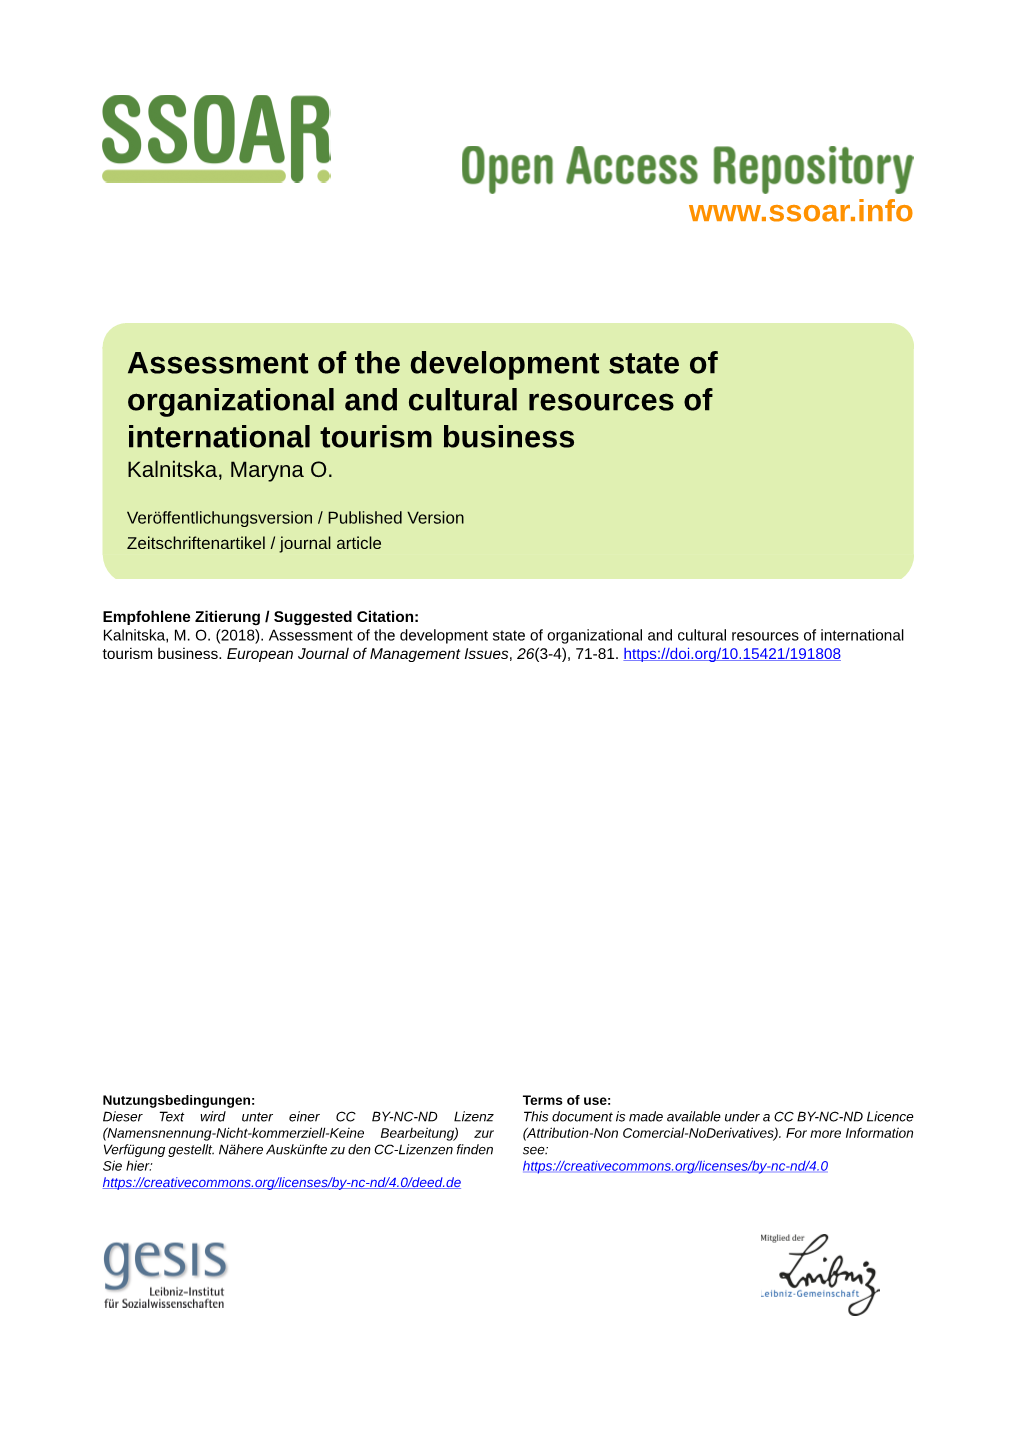 Assessment of the Development State of Organizational and Cultural Resources of International Tourism Business Kalnіtska, Maryna O